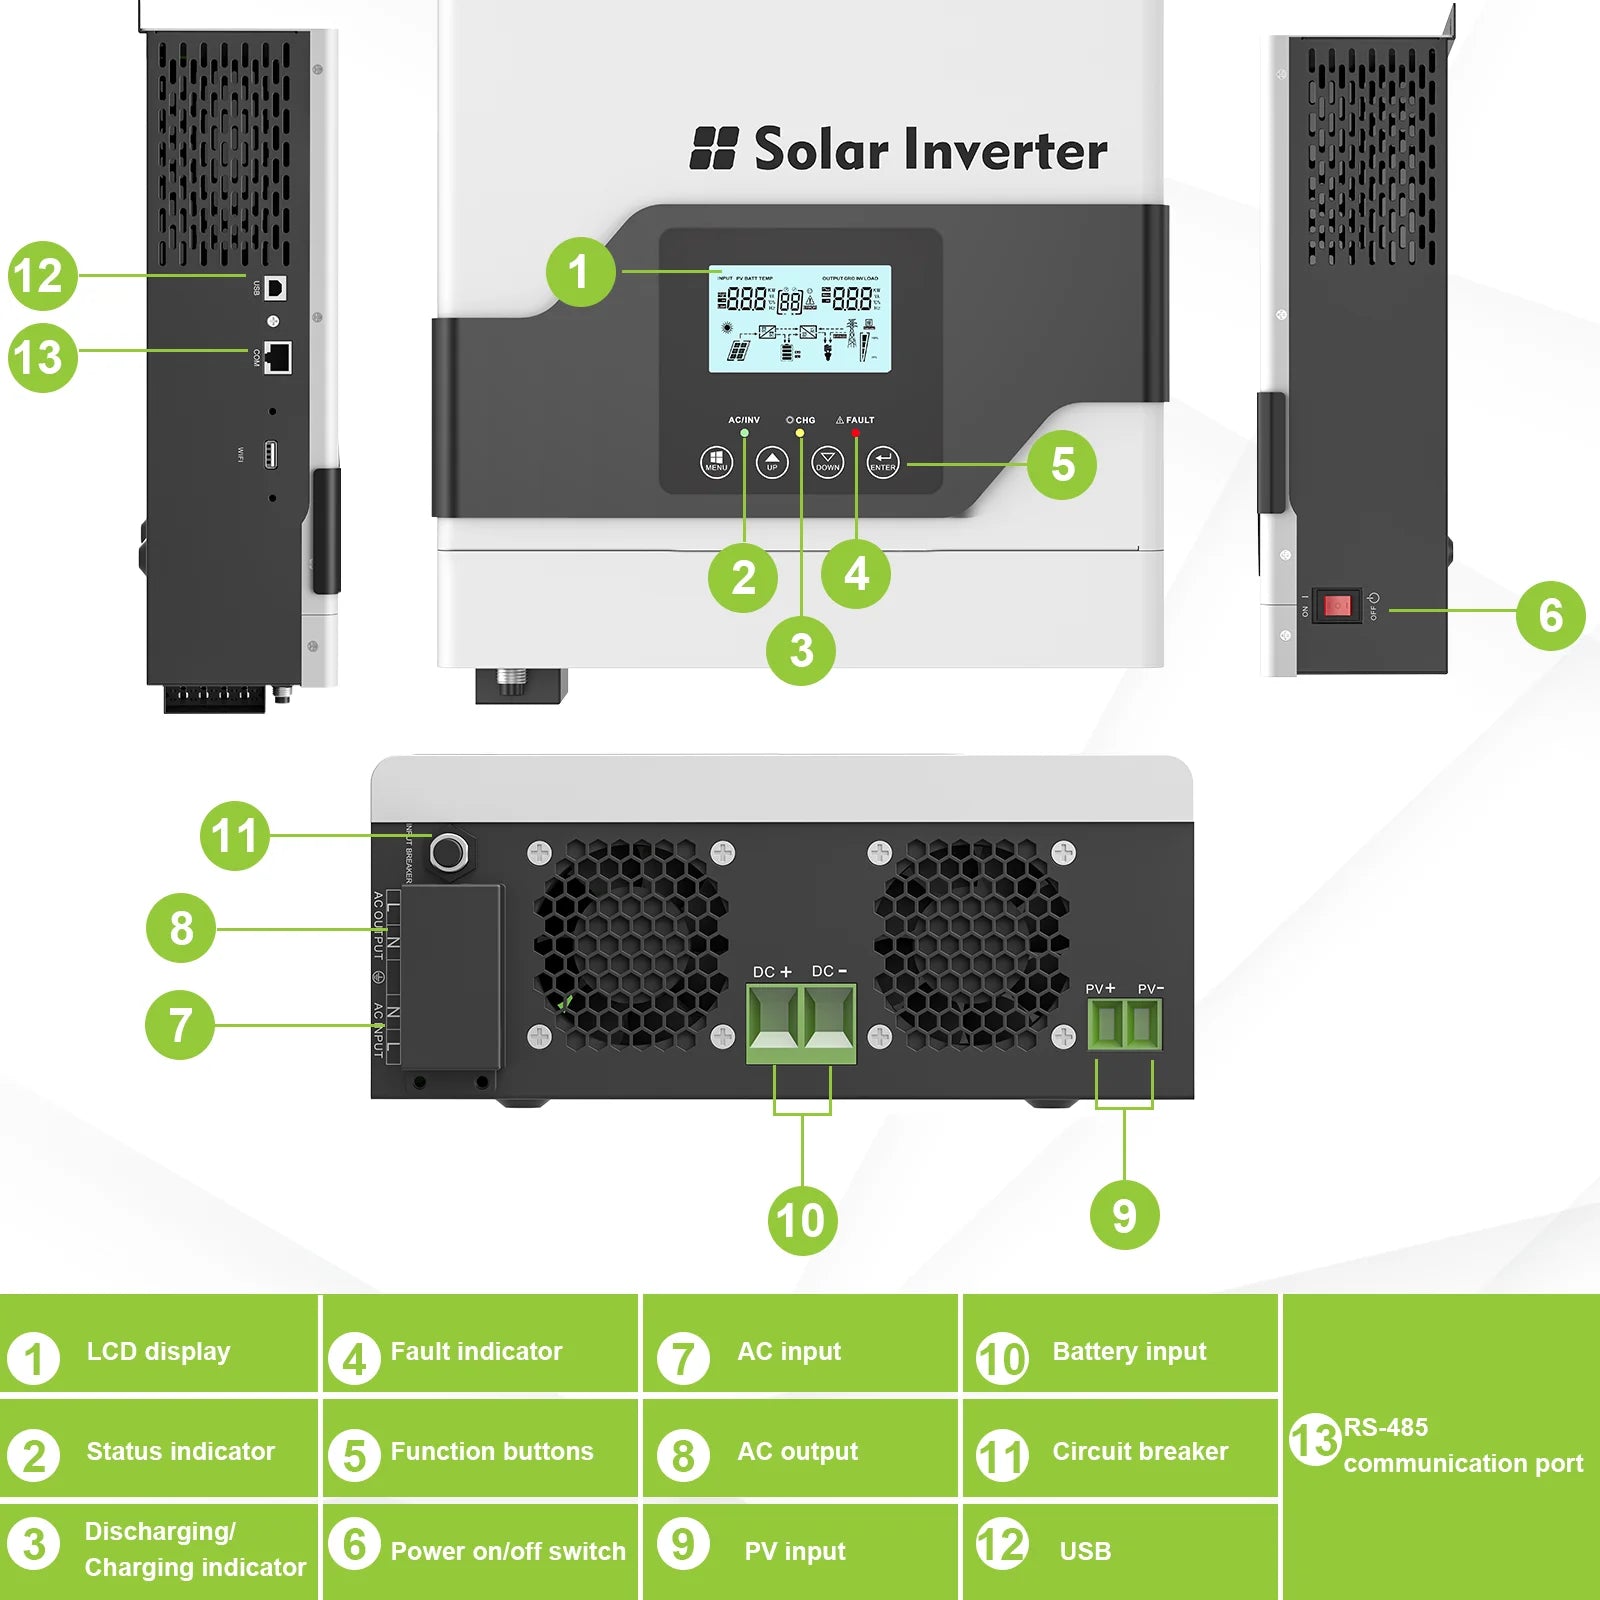 Solar inverter with 12V DC input, LCD display, and RS-485 comms for monitoring and control.